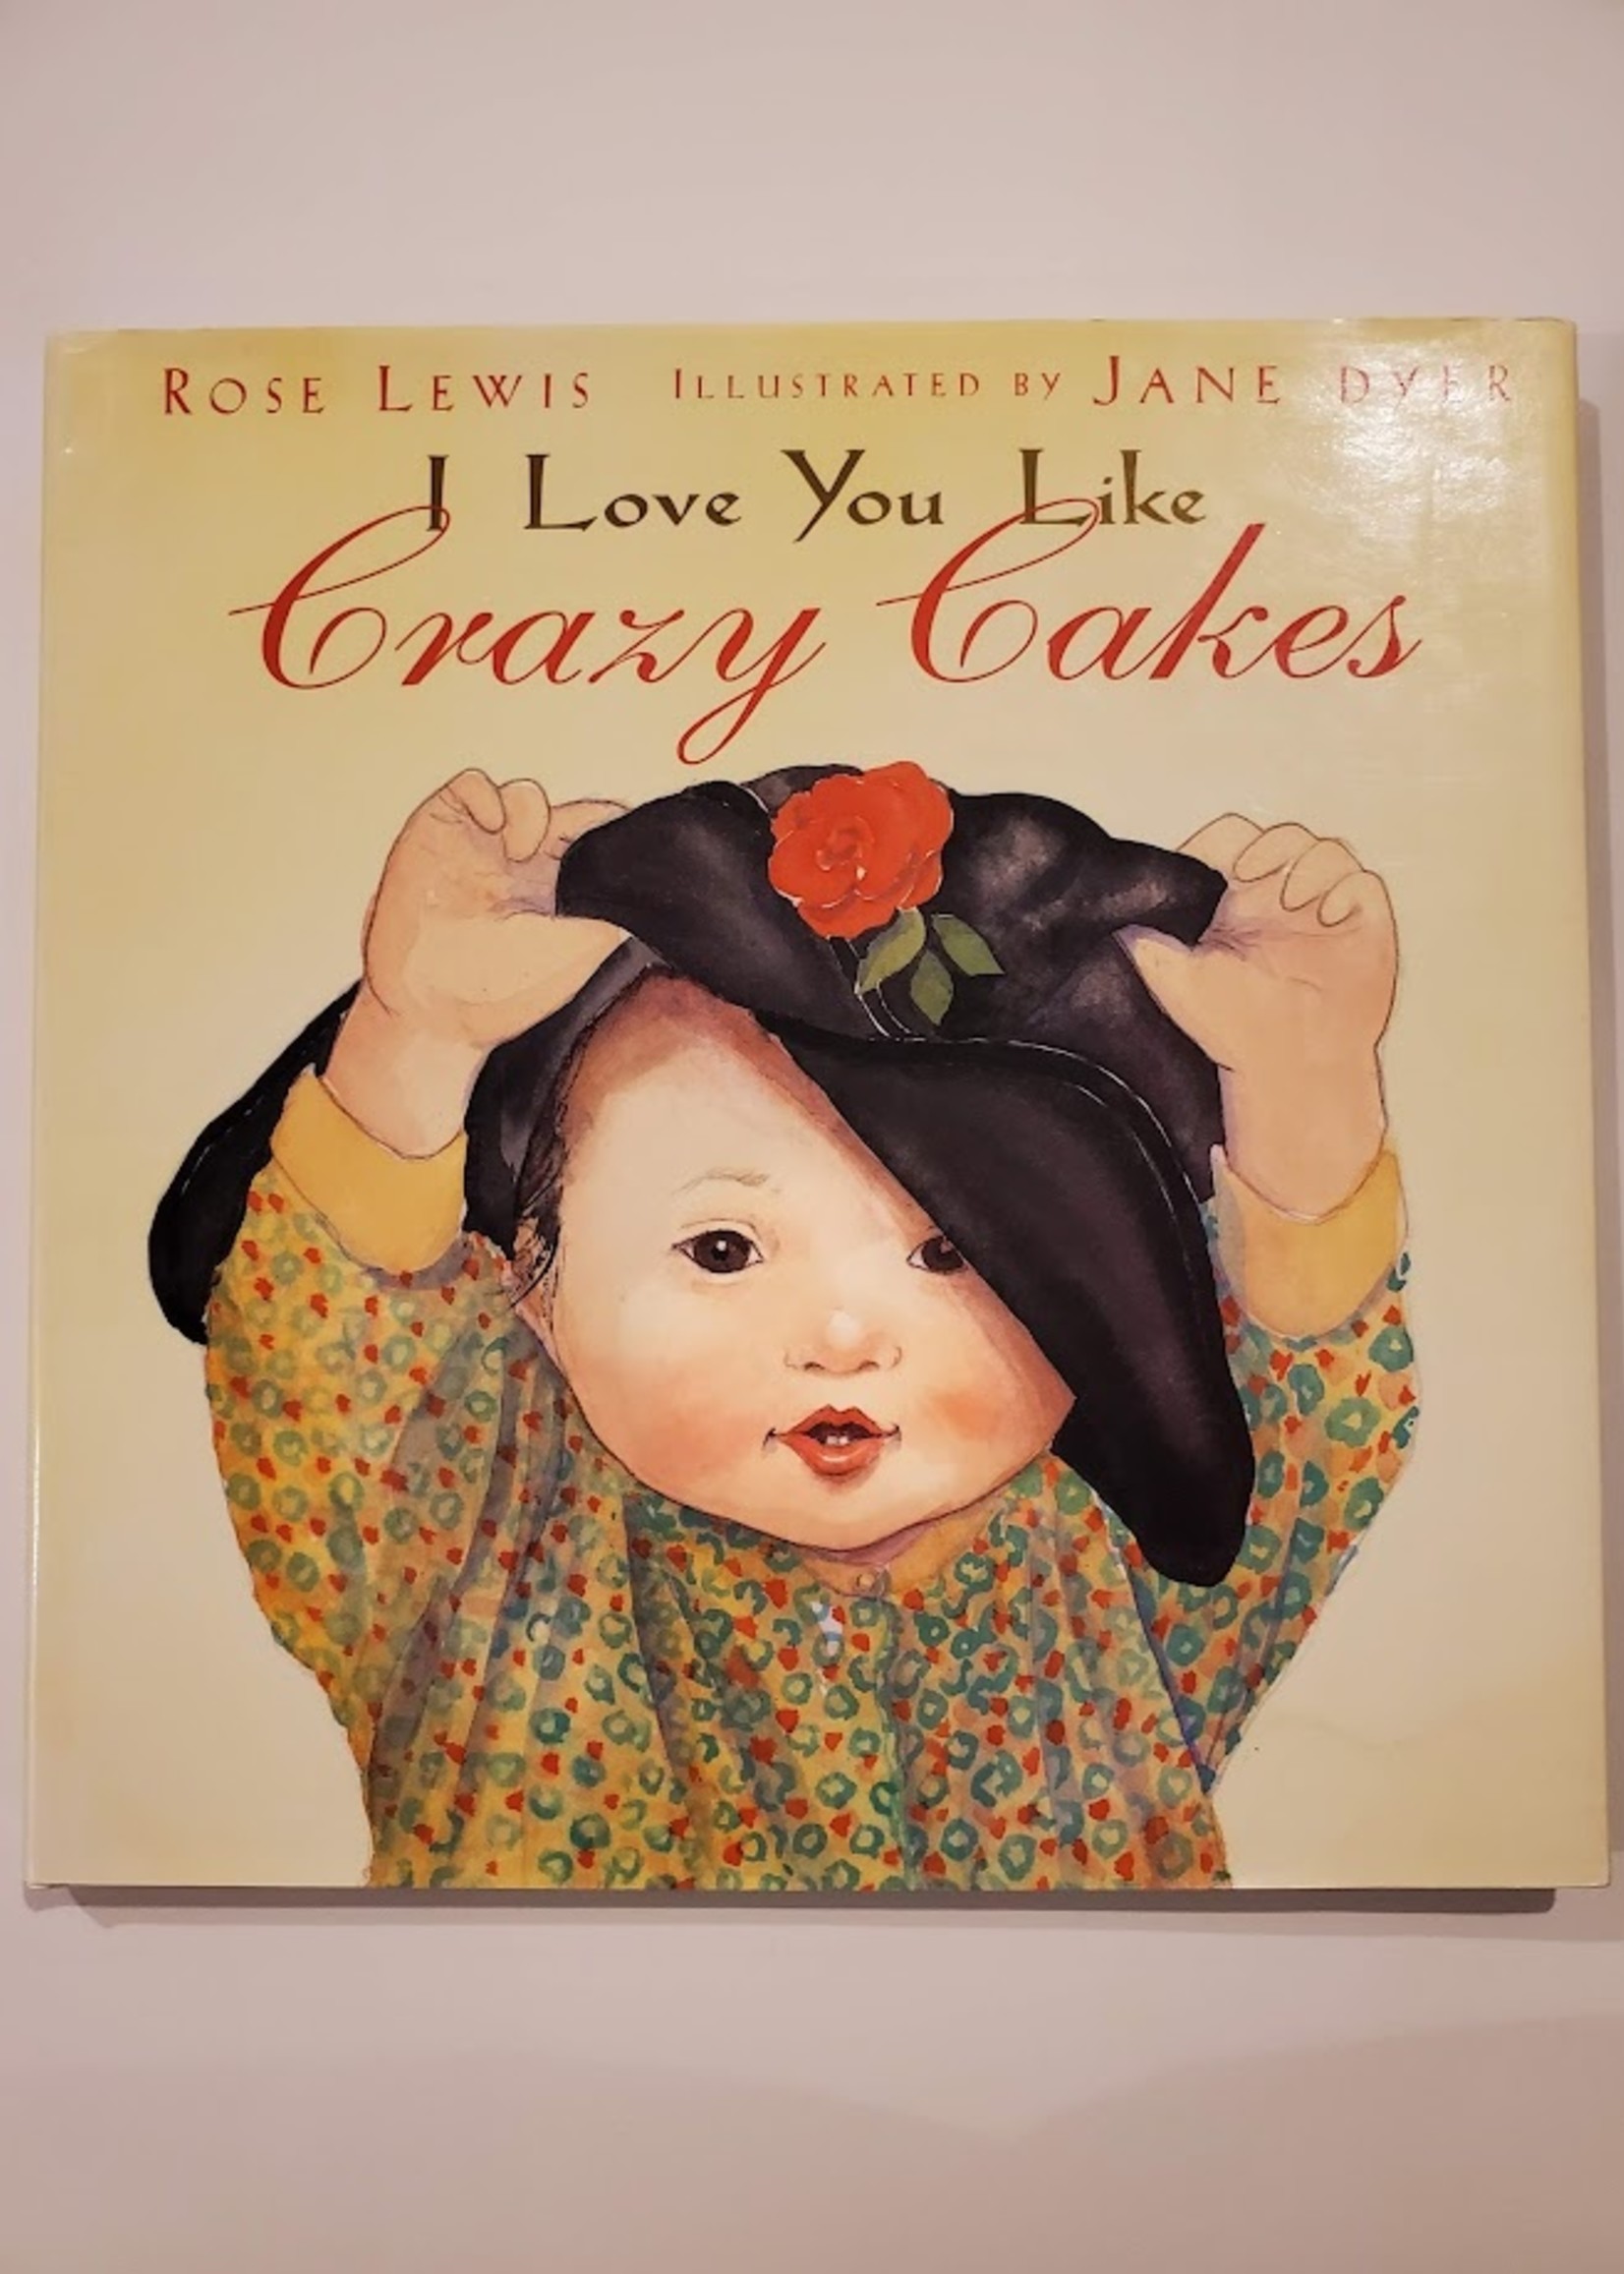 Little Brown & Company I Love You Like Crazy Cakes